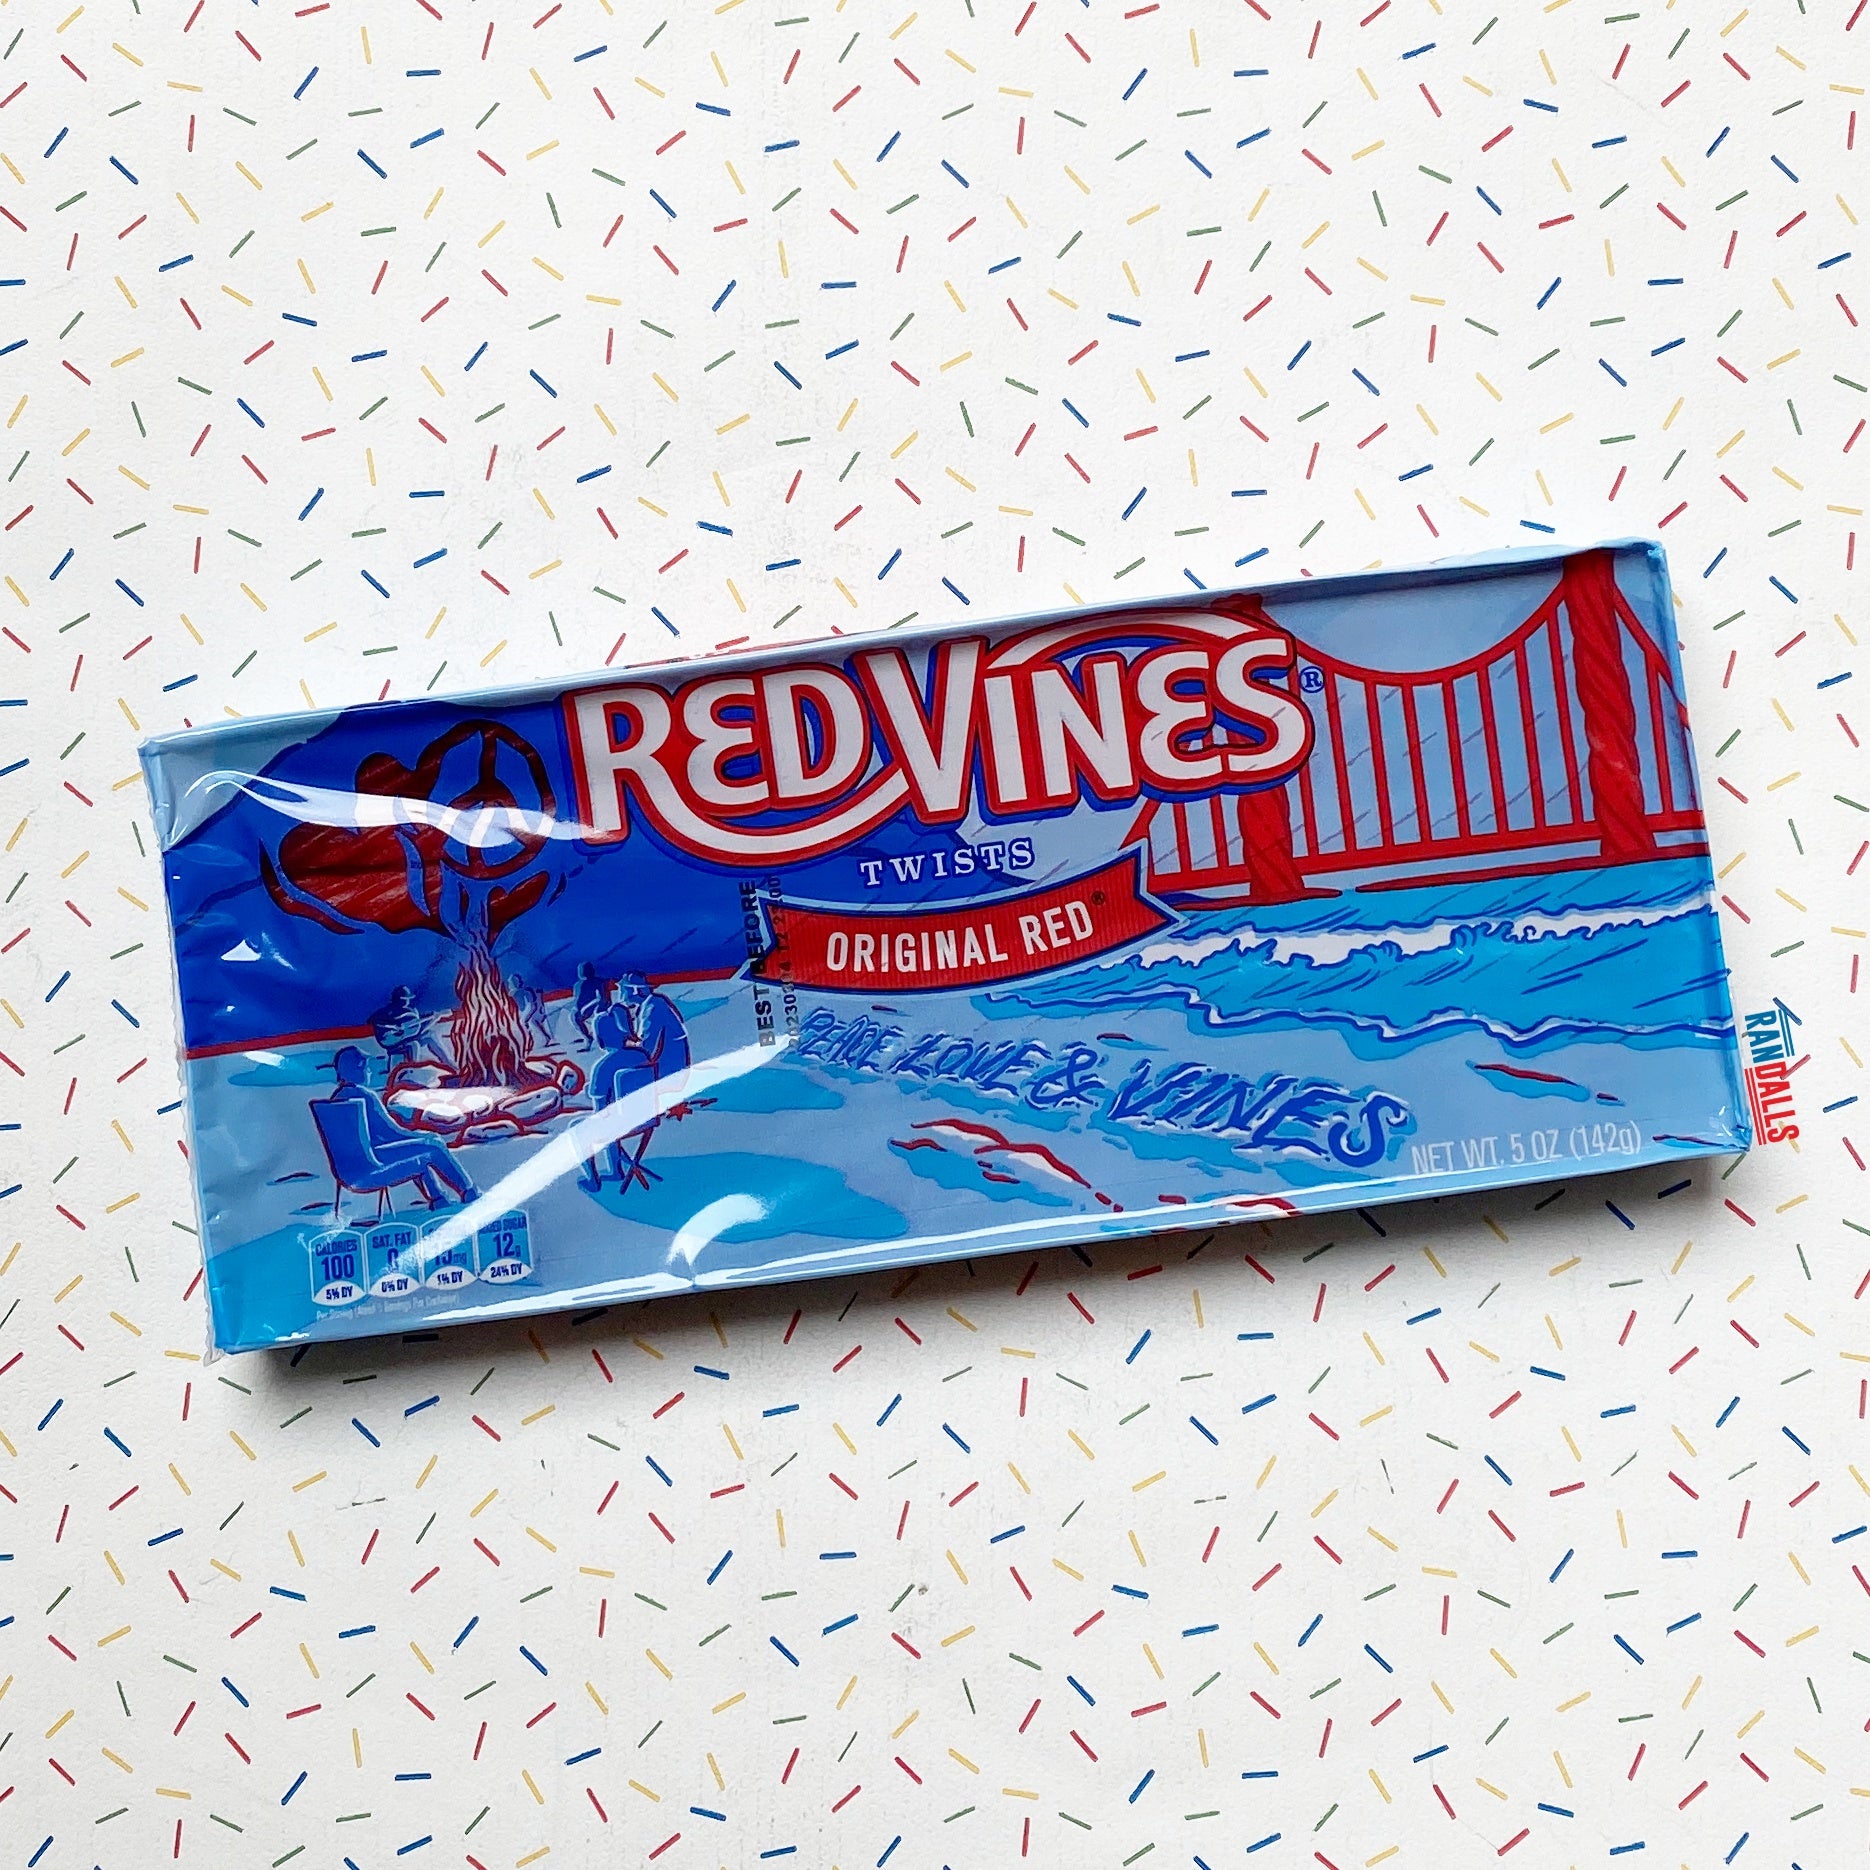 red vines twists, original red, candy, gummy, sweets, chewy, usa, randalls